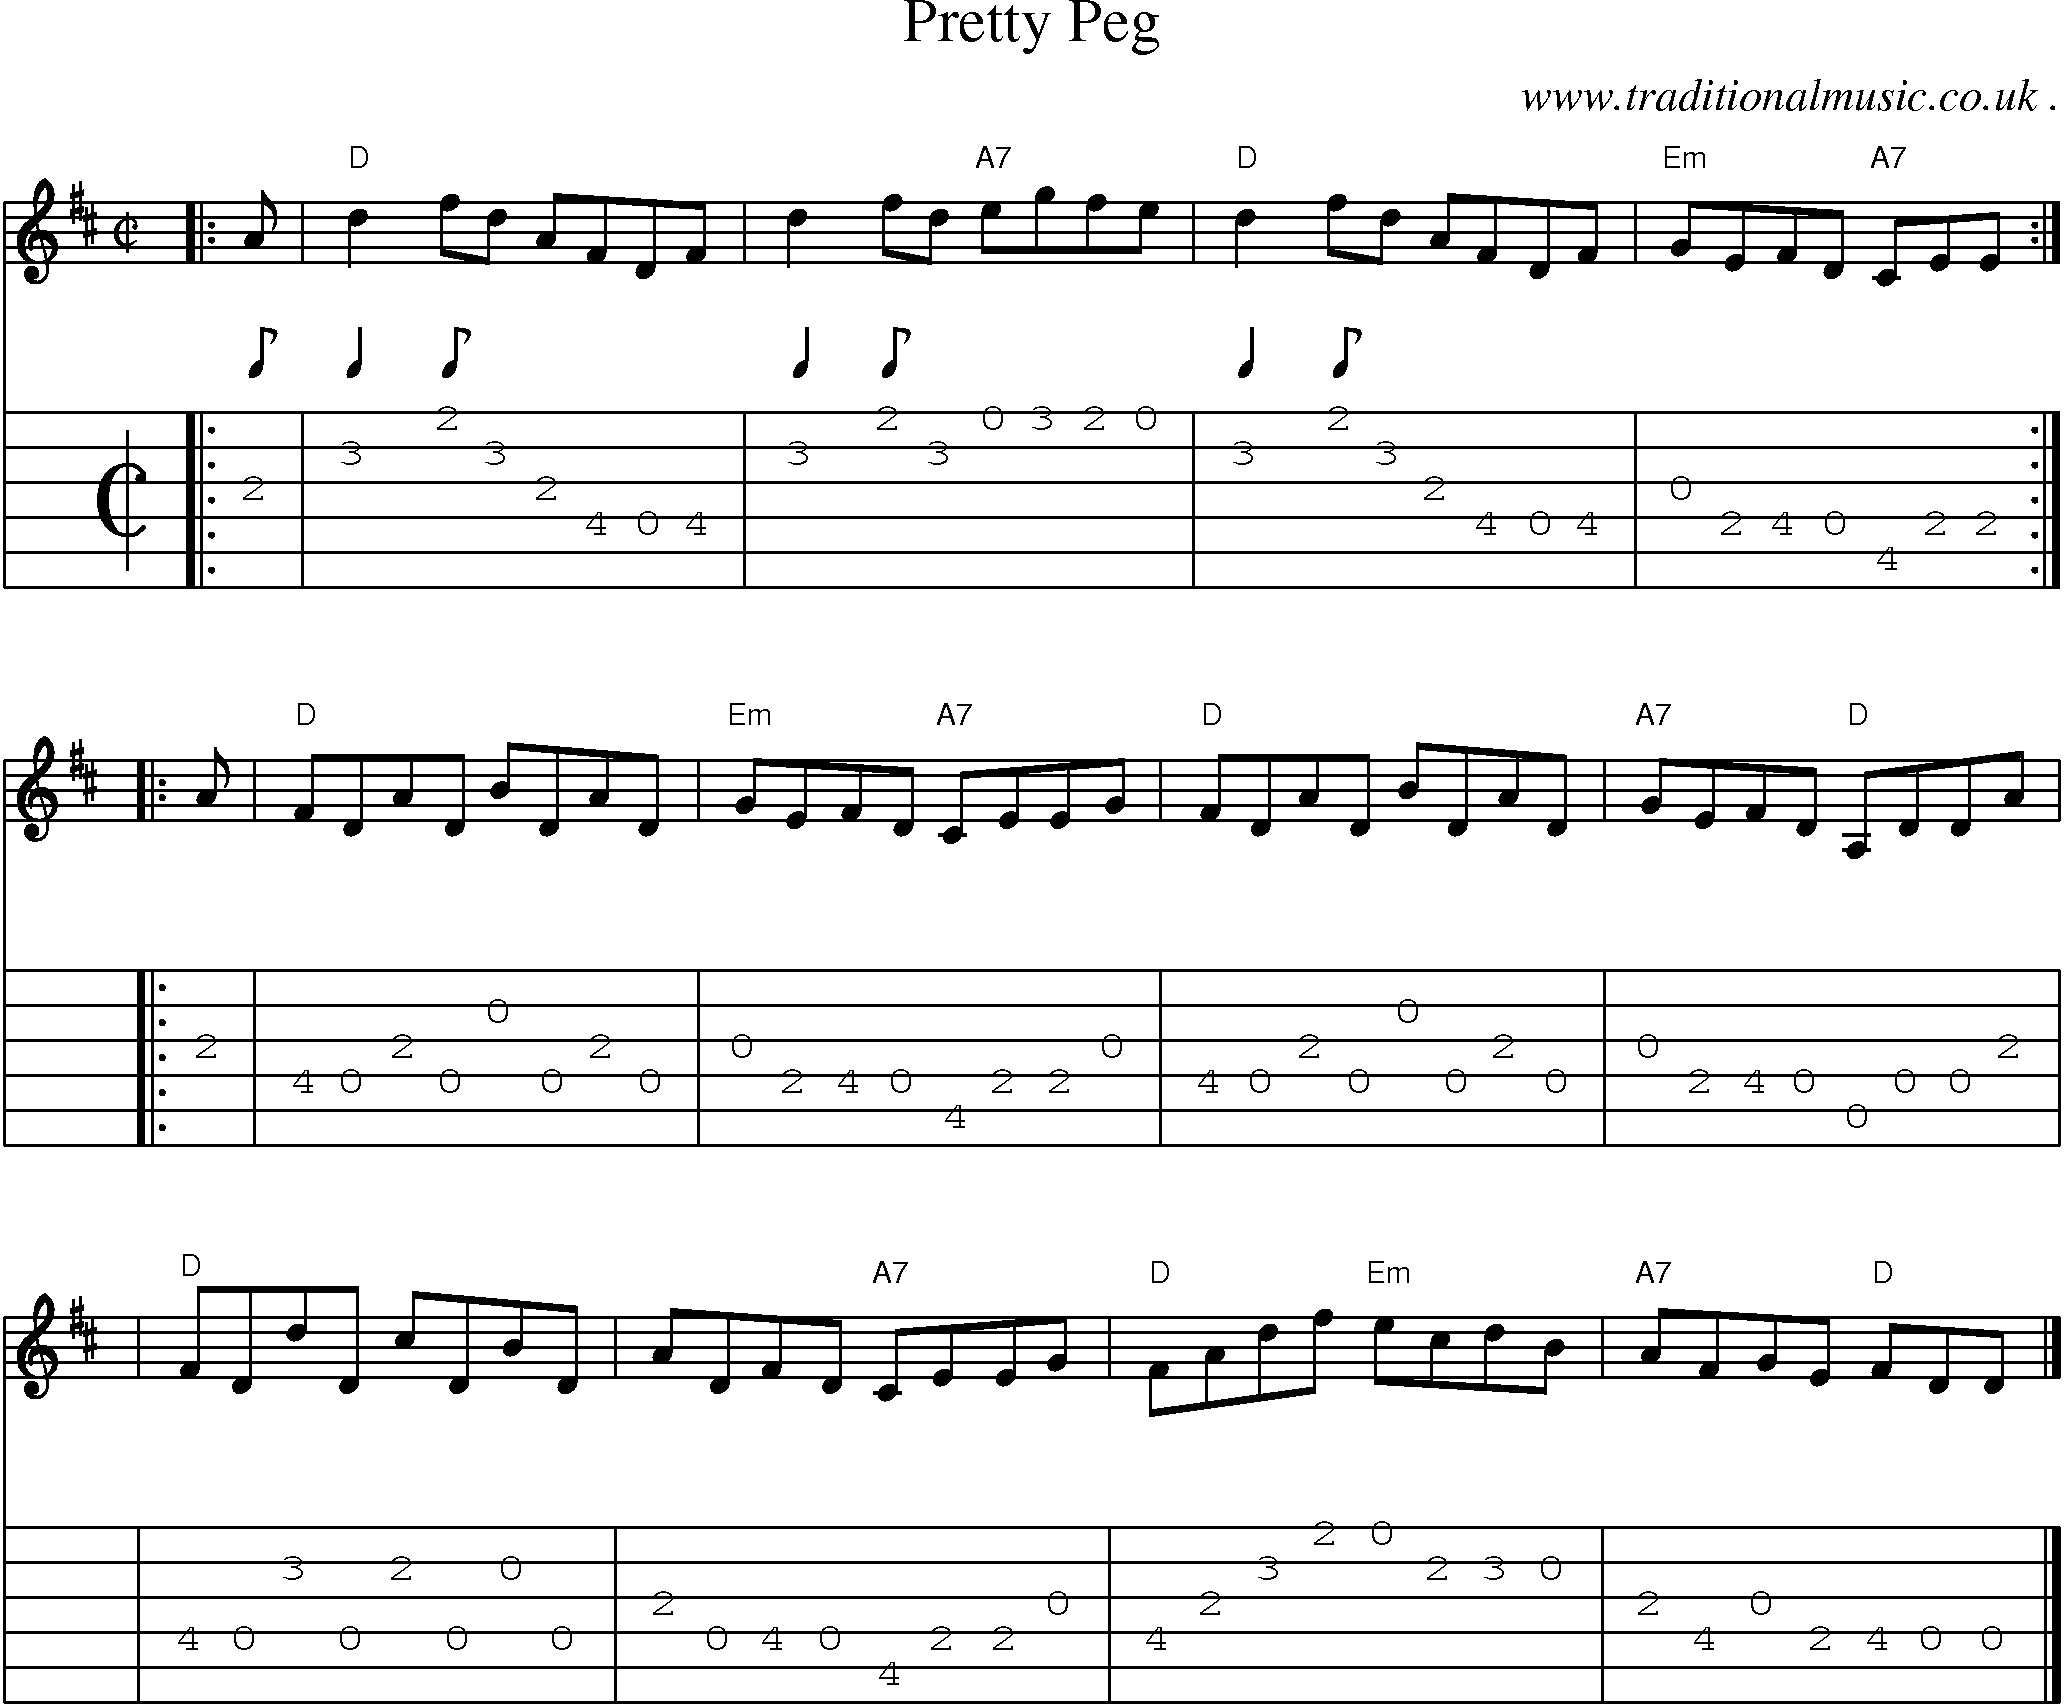 Sheet-music  score, Chords and Guitar Tabs for Pretty Peg